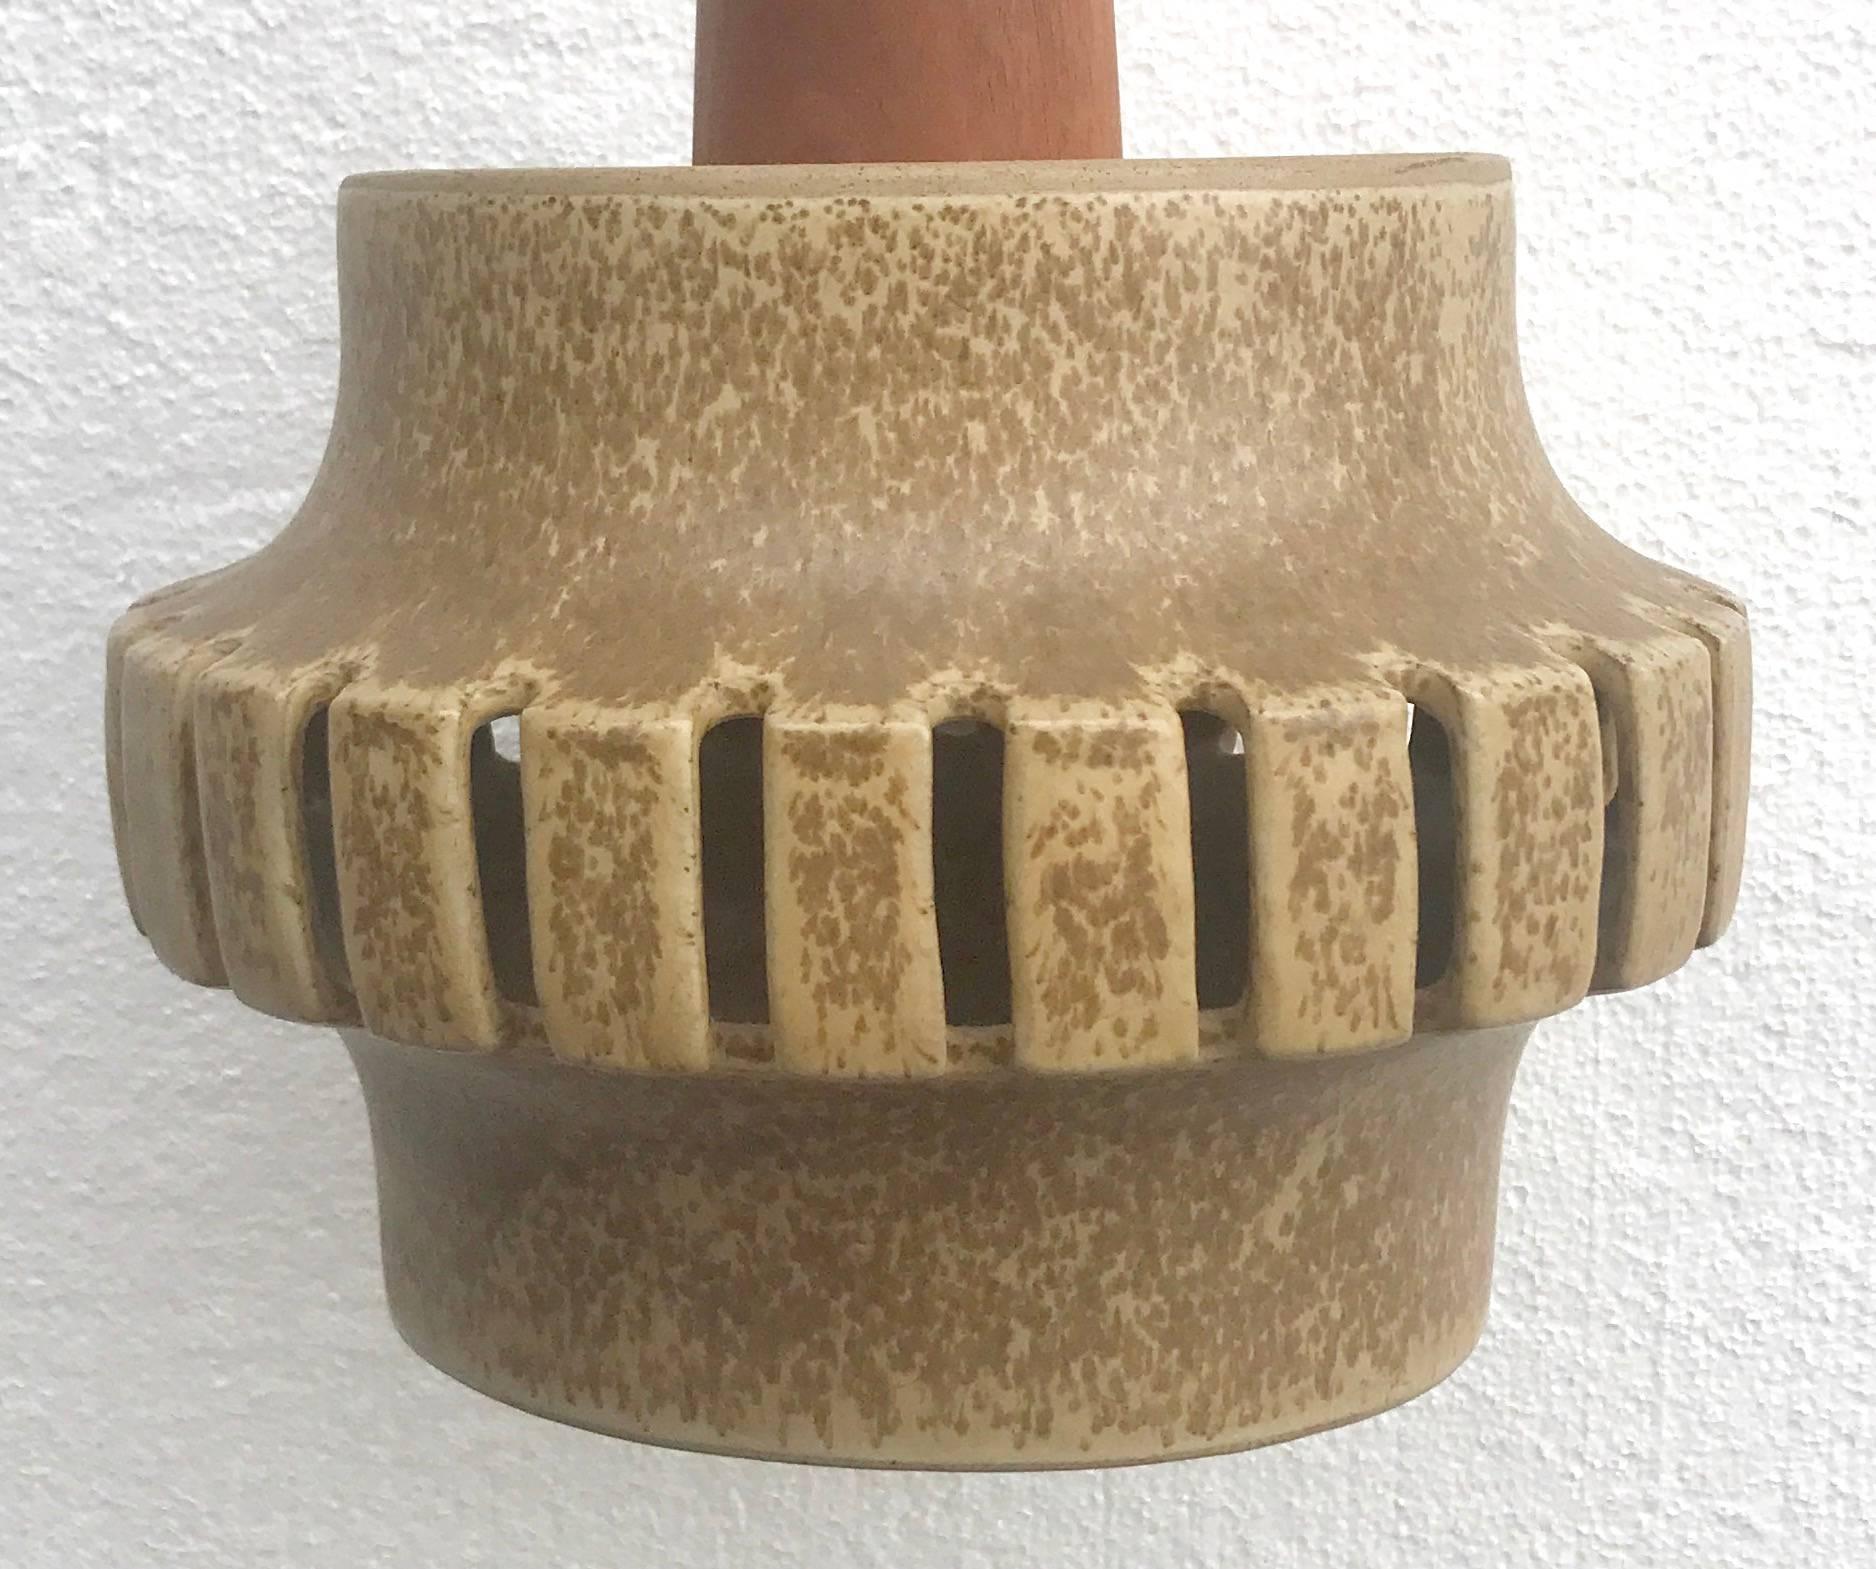 Super rare American modern 1950s Gordon Martz art pottery hanging pendant lamp with interesting reticulated cut-out design, and cocoa colored spatter design glaze. This would be perfect for an entryway or a powder room! Comes with three feet of